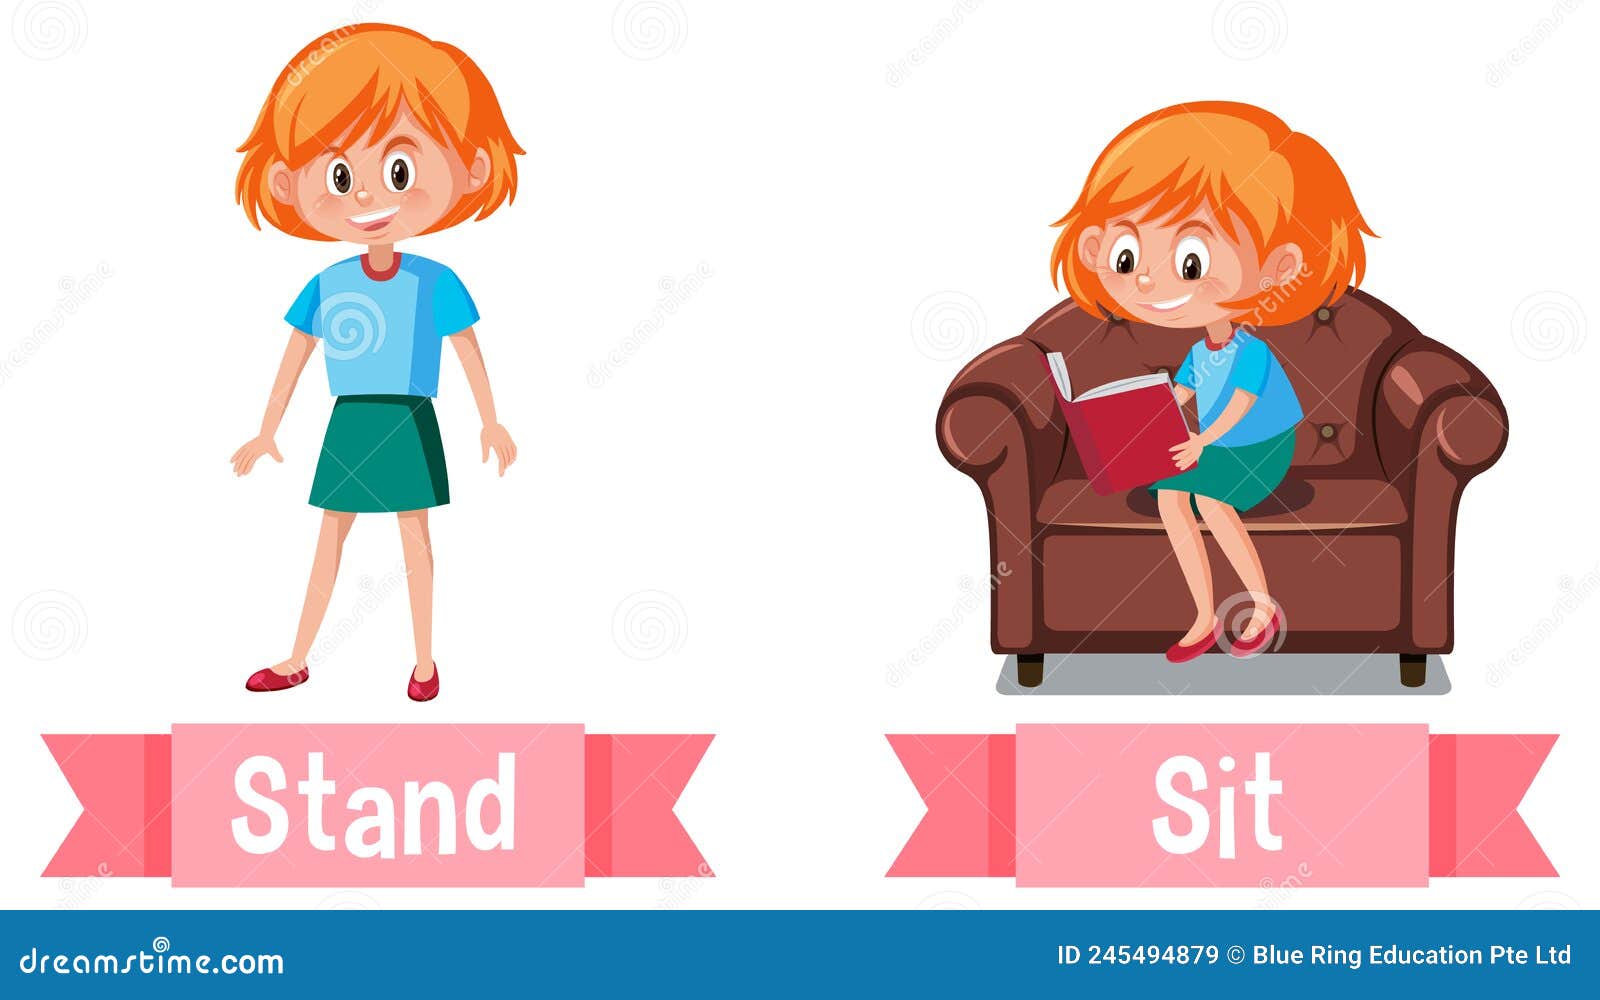 Opposite Words Sit Stand Stock Illustrations – 14 Opposite Words Sit Stand  Stock Illustrations, Vectors & Clipart - Dreamstime